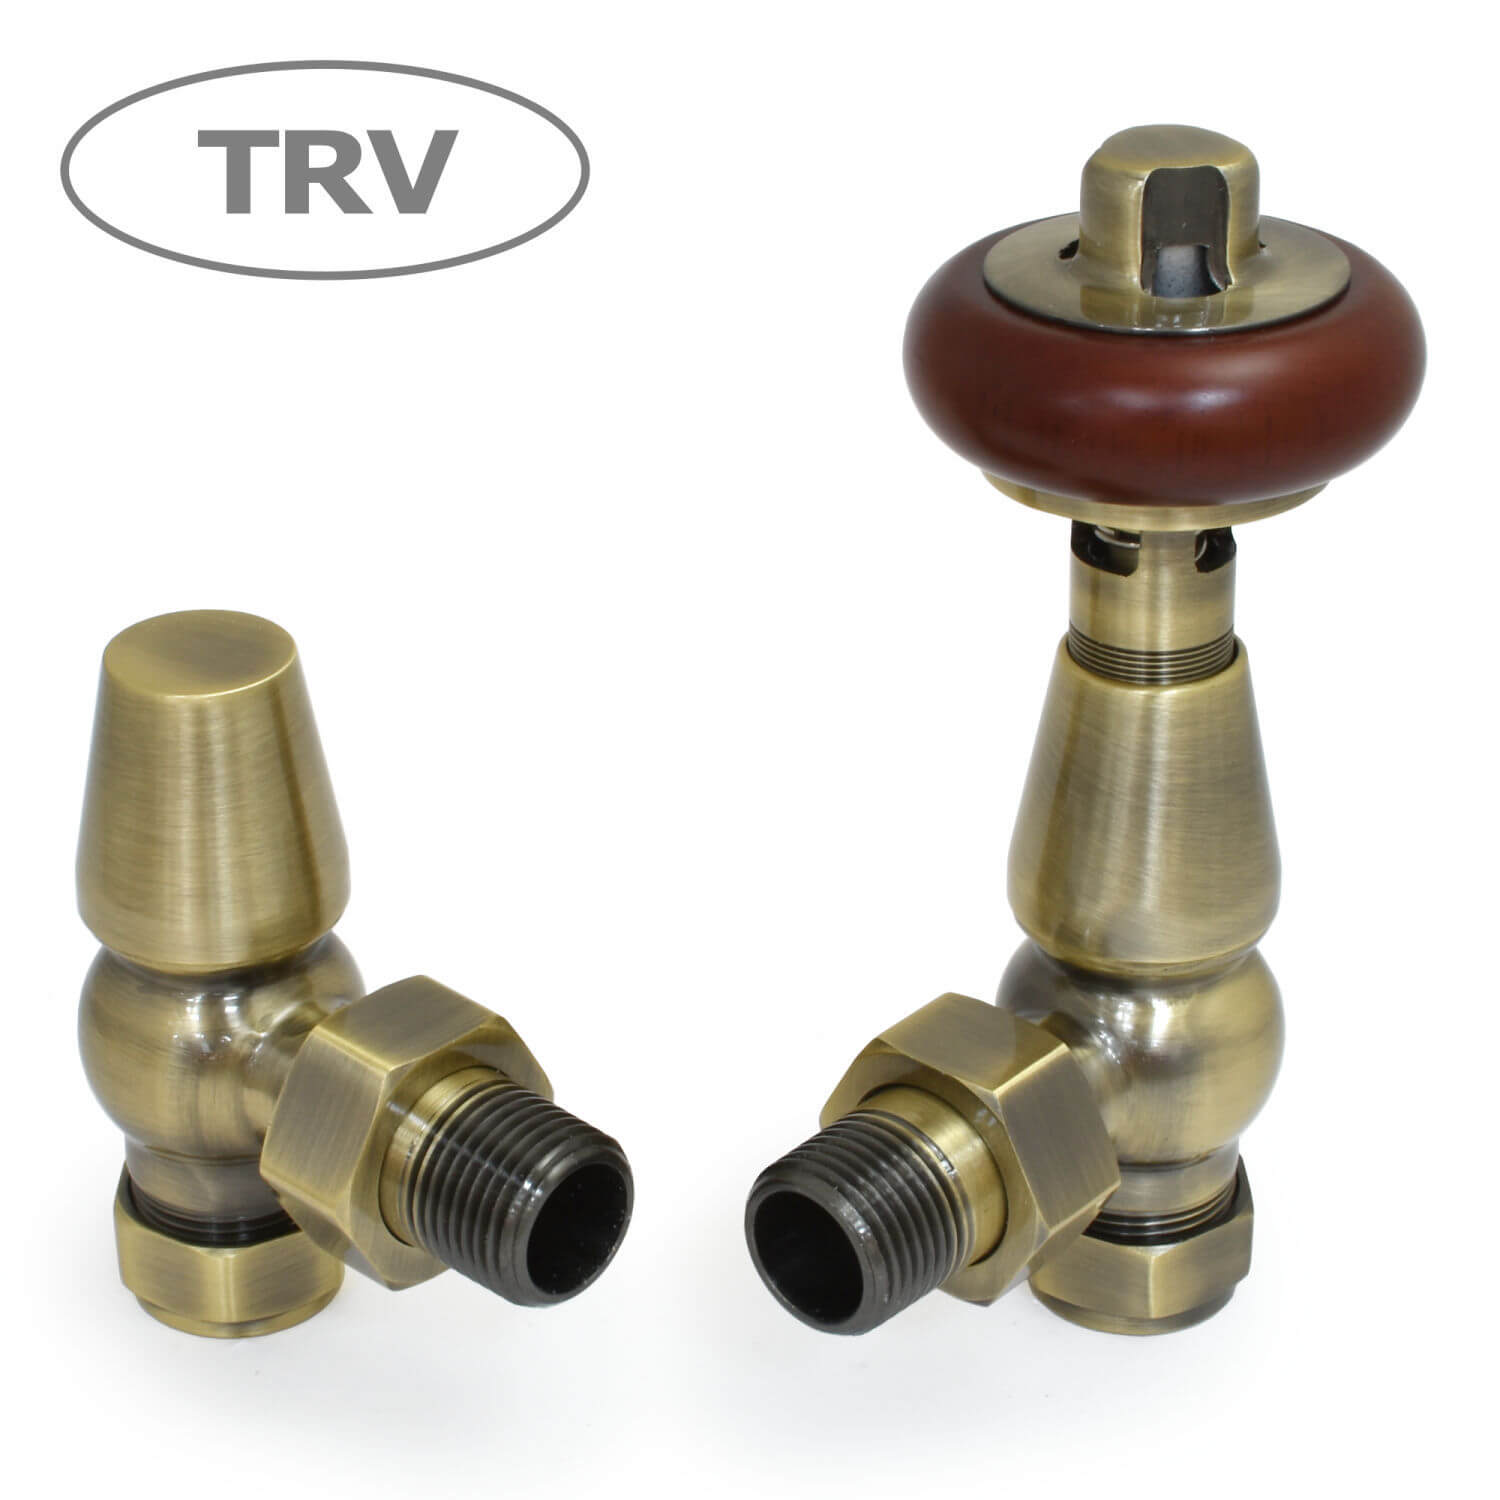 dq-enzo-TRV angled-antique-brass